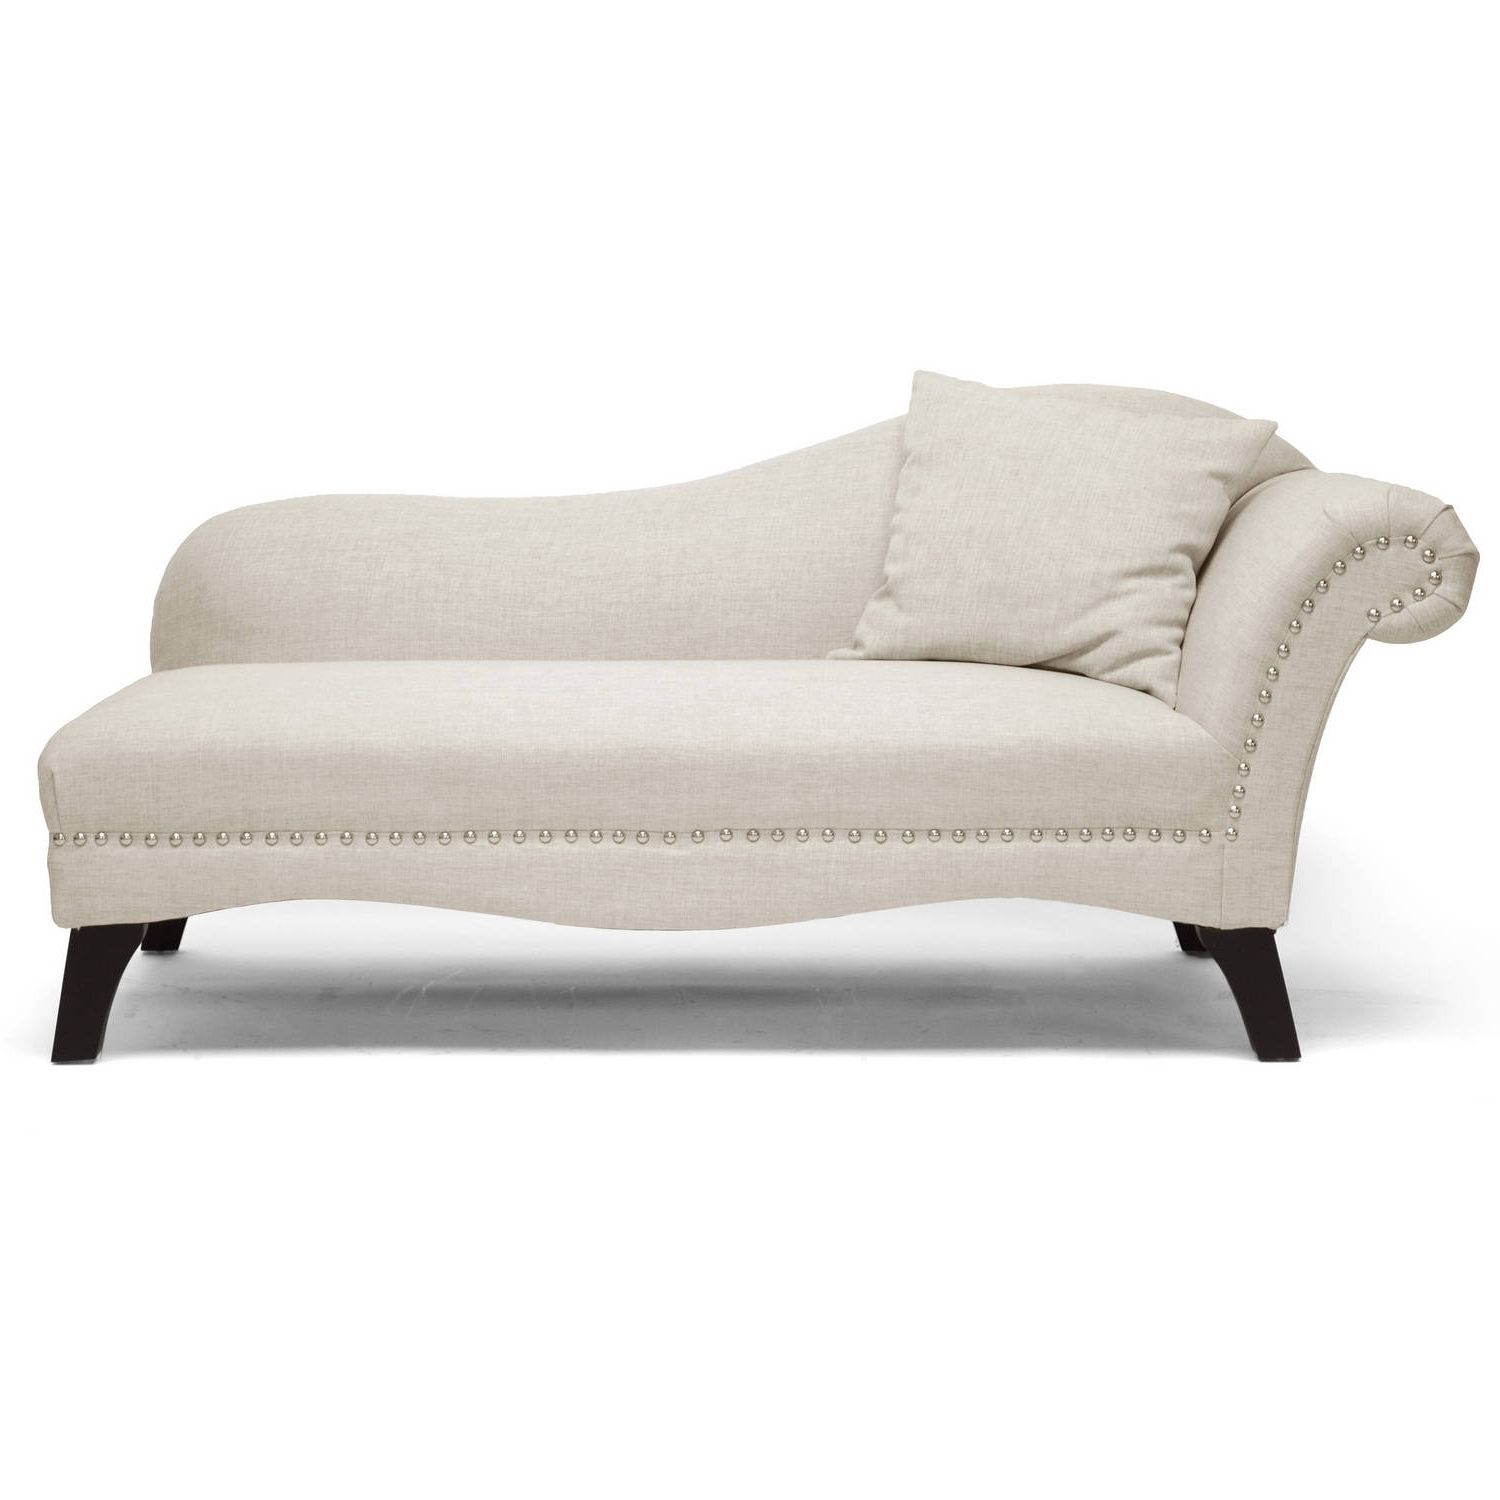 High Quality Chaise Lounge Chairs Intended For Well Liked Chaise Lounges – Walmart (View 1 of 15)